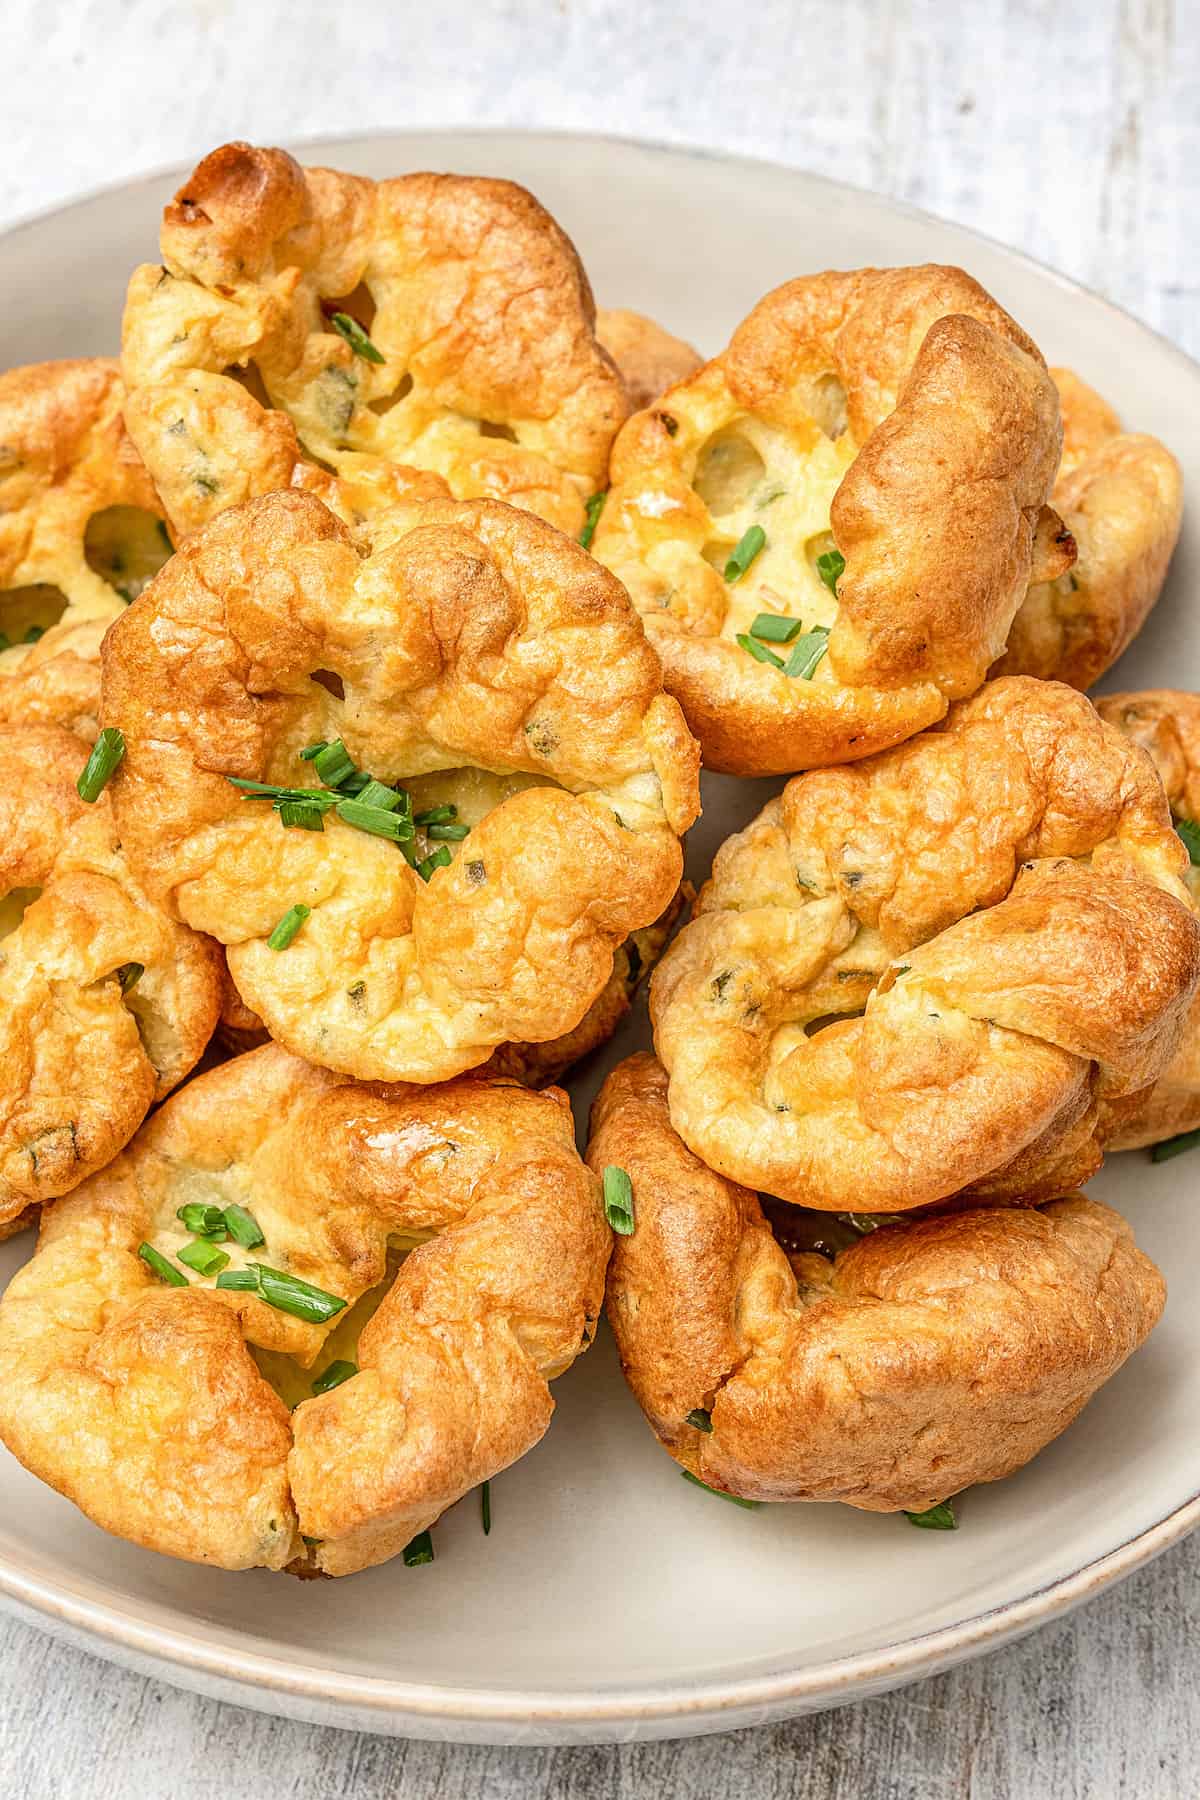 Gluten-free Yorkshire pudding arranged on a serving plate.